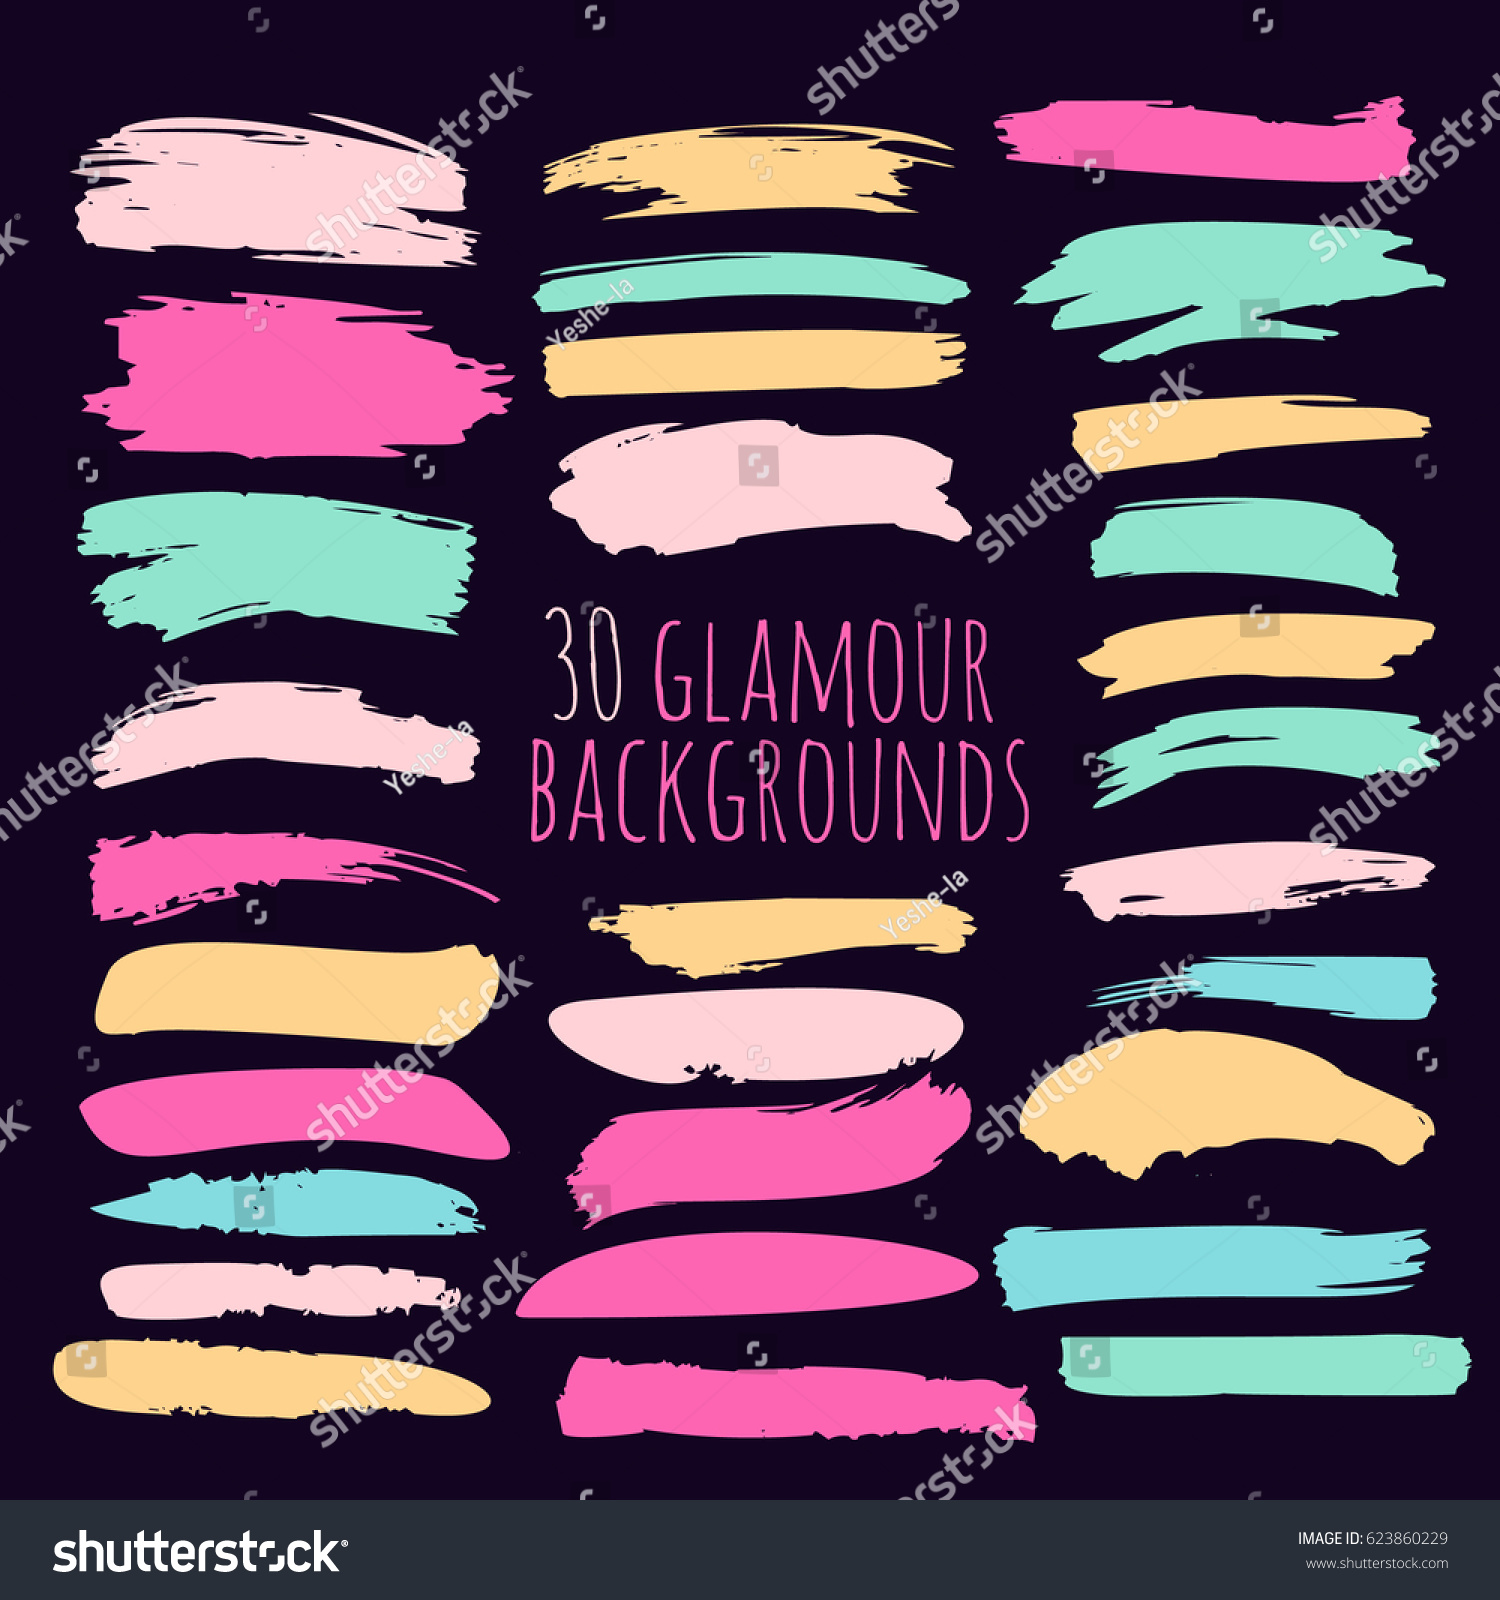 SVG of Set of thirty trendy brush strokes or backgrounds in glamour colours. Hand painted pink, turquoise, ochre, and skin colour ink brush strokes, brushes, and lines. Dirty grunge artistic design elements. svg